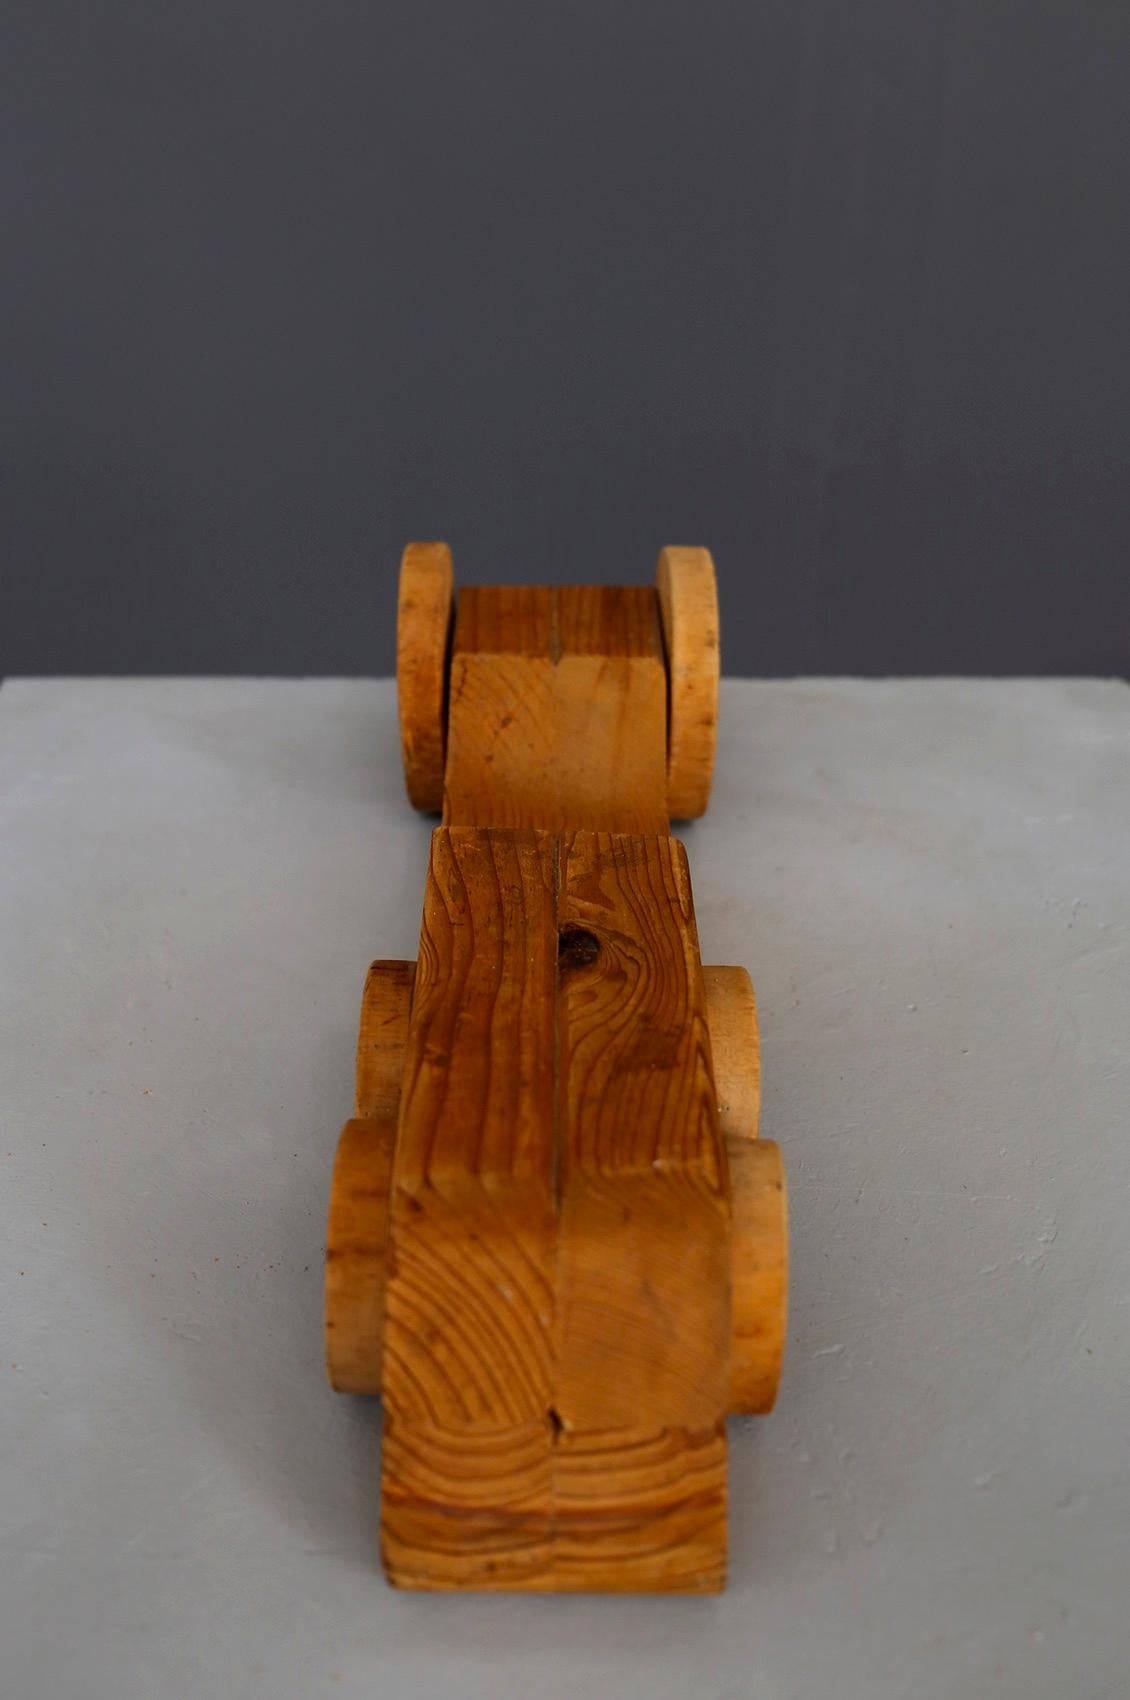 Wood Sculpture Futurist Machine by Urano Palma Locomotive title, from 1956 In Good Condition For Sale In Milano, IT